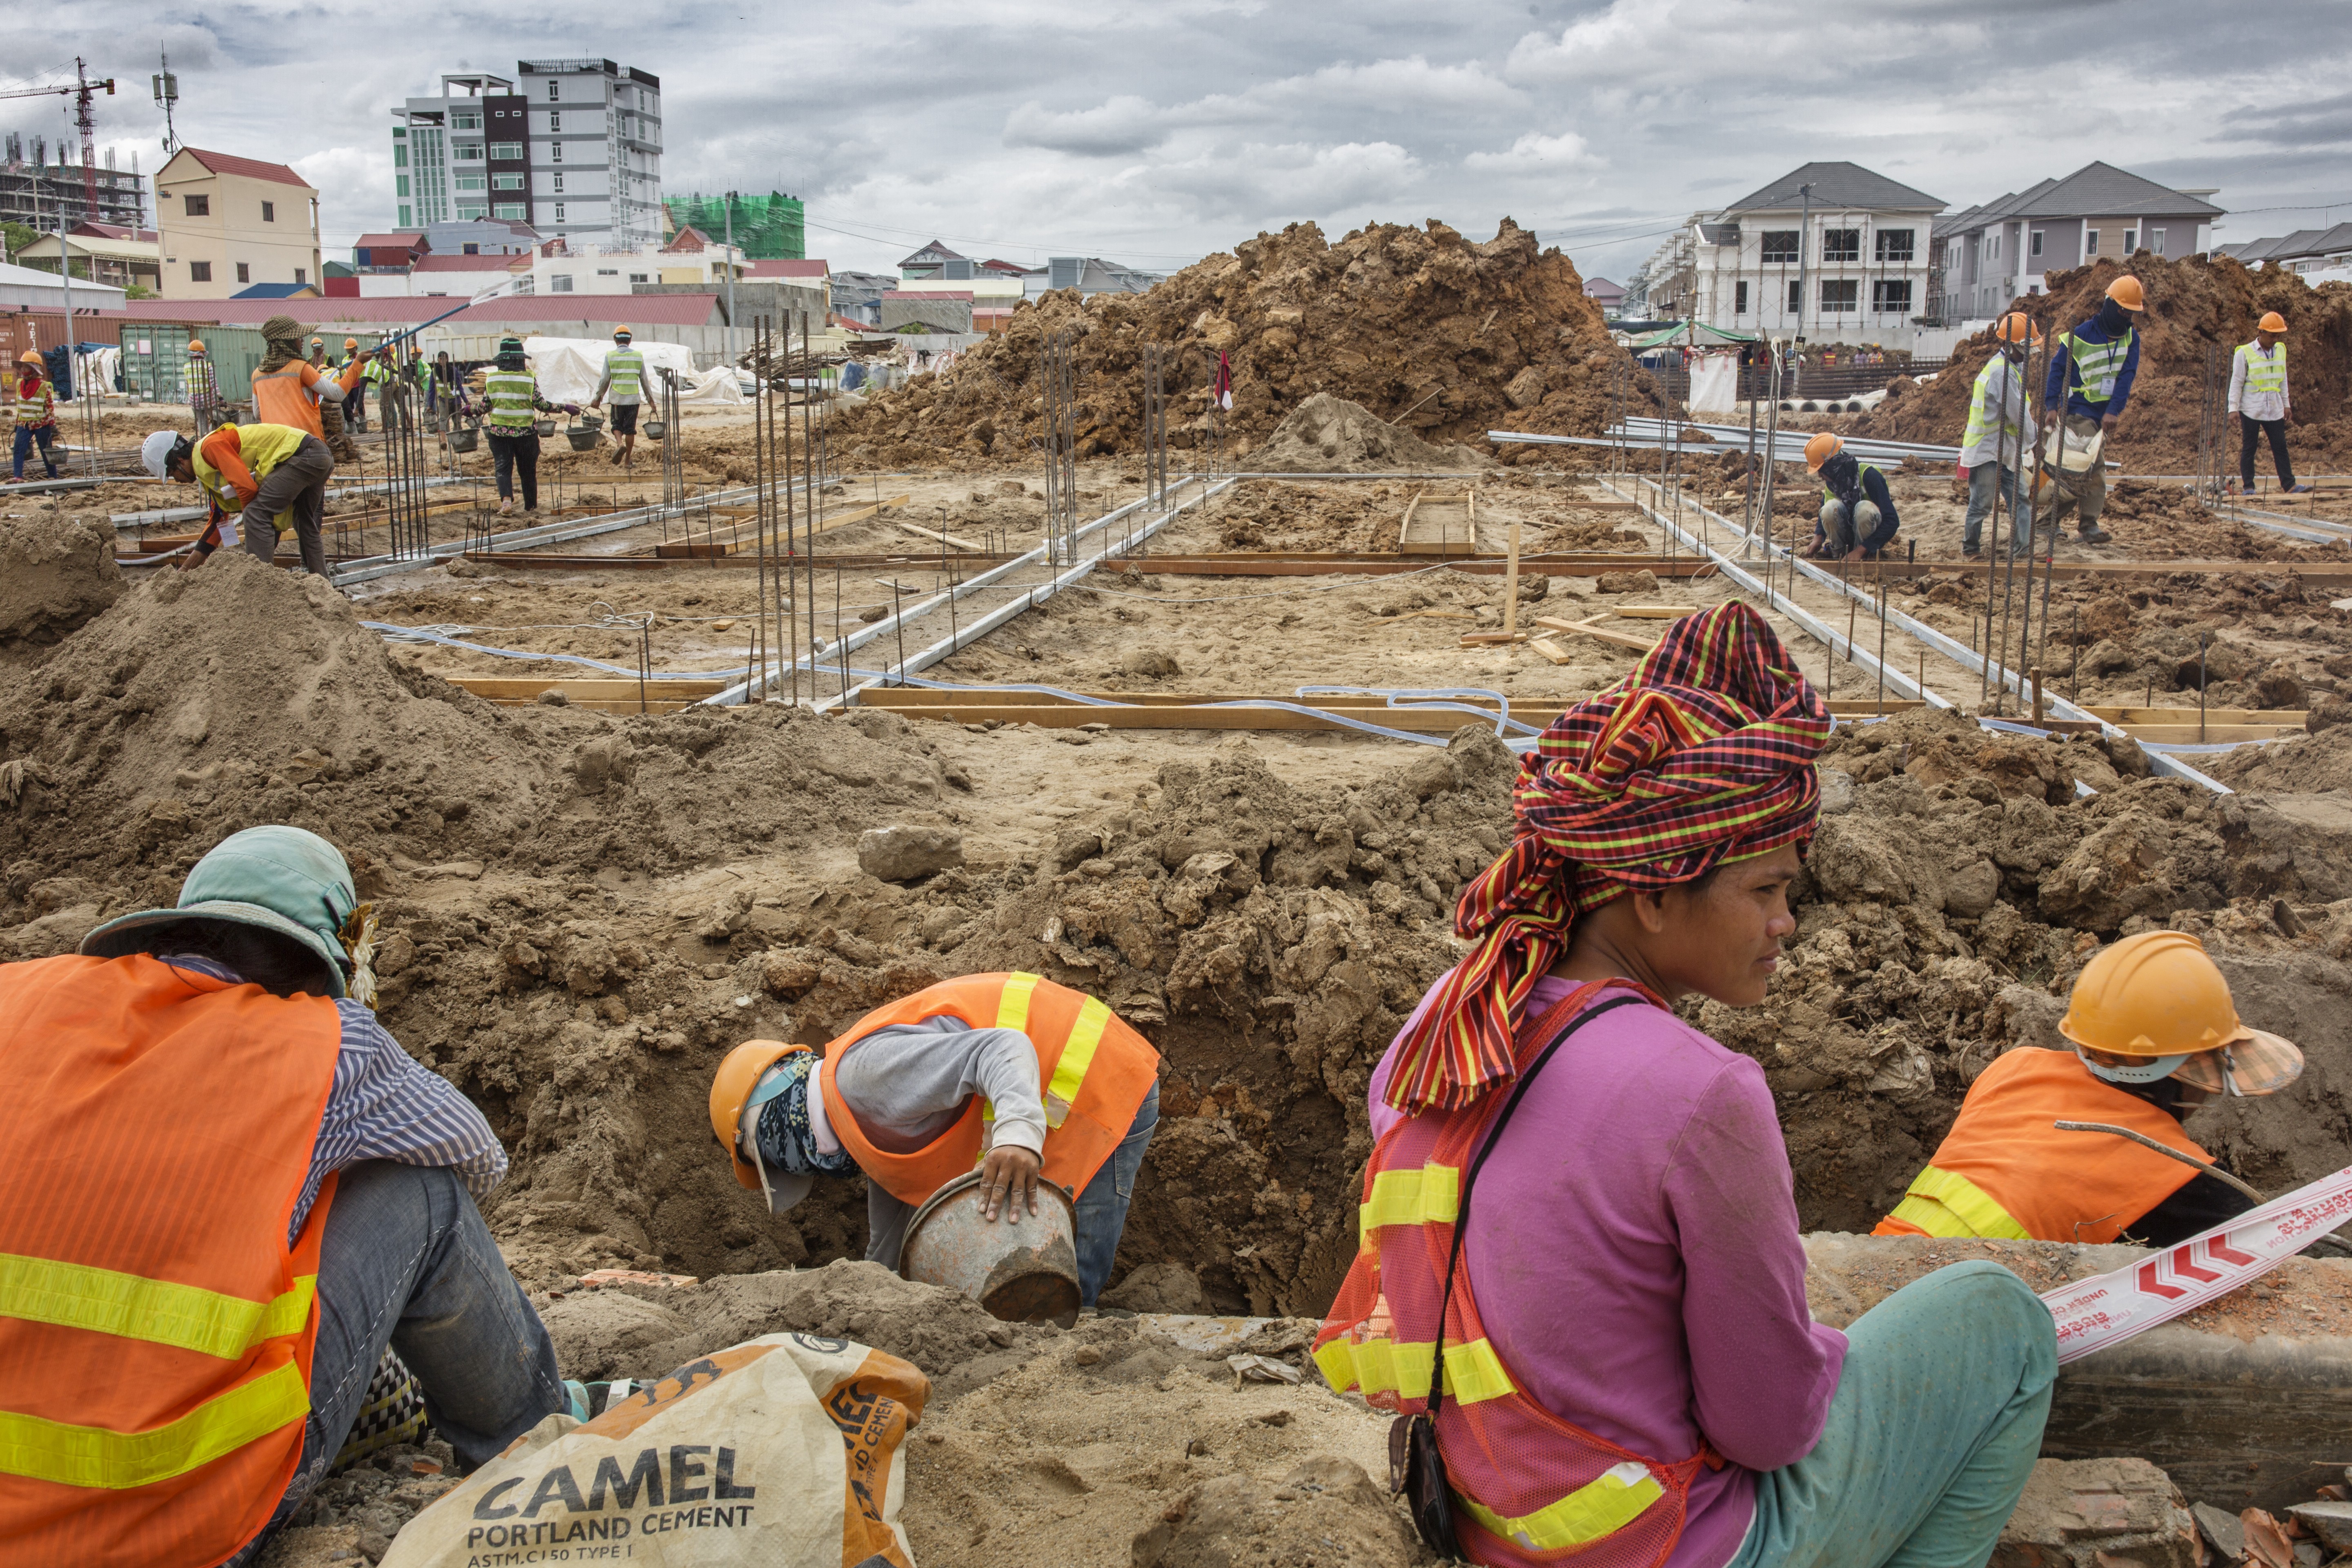 One of many construction projects in the Cambodian capital of Phnom Penh. Pictures: Jonas Gratzer